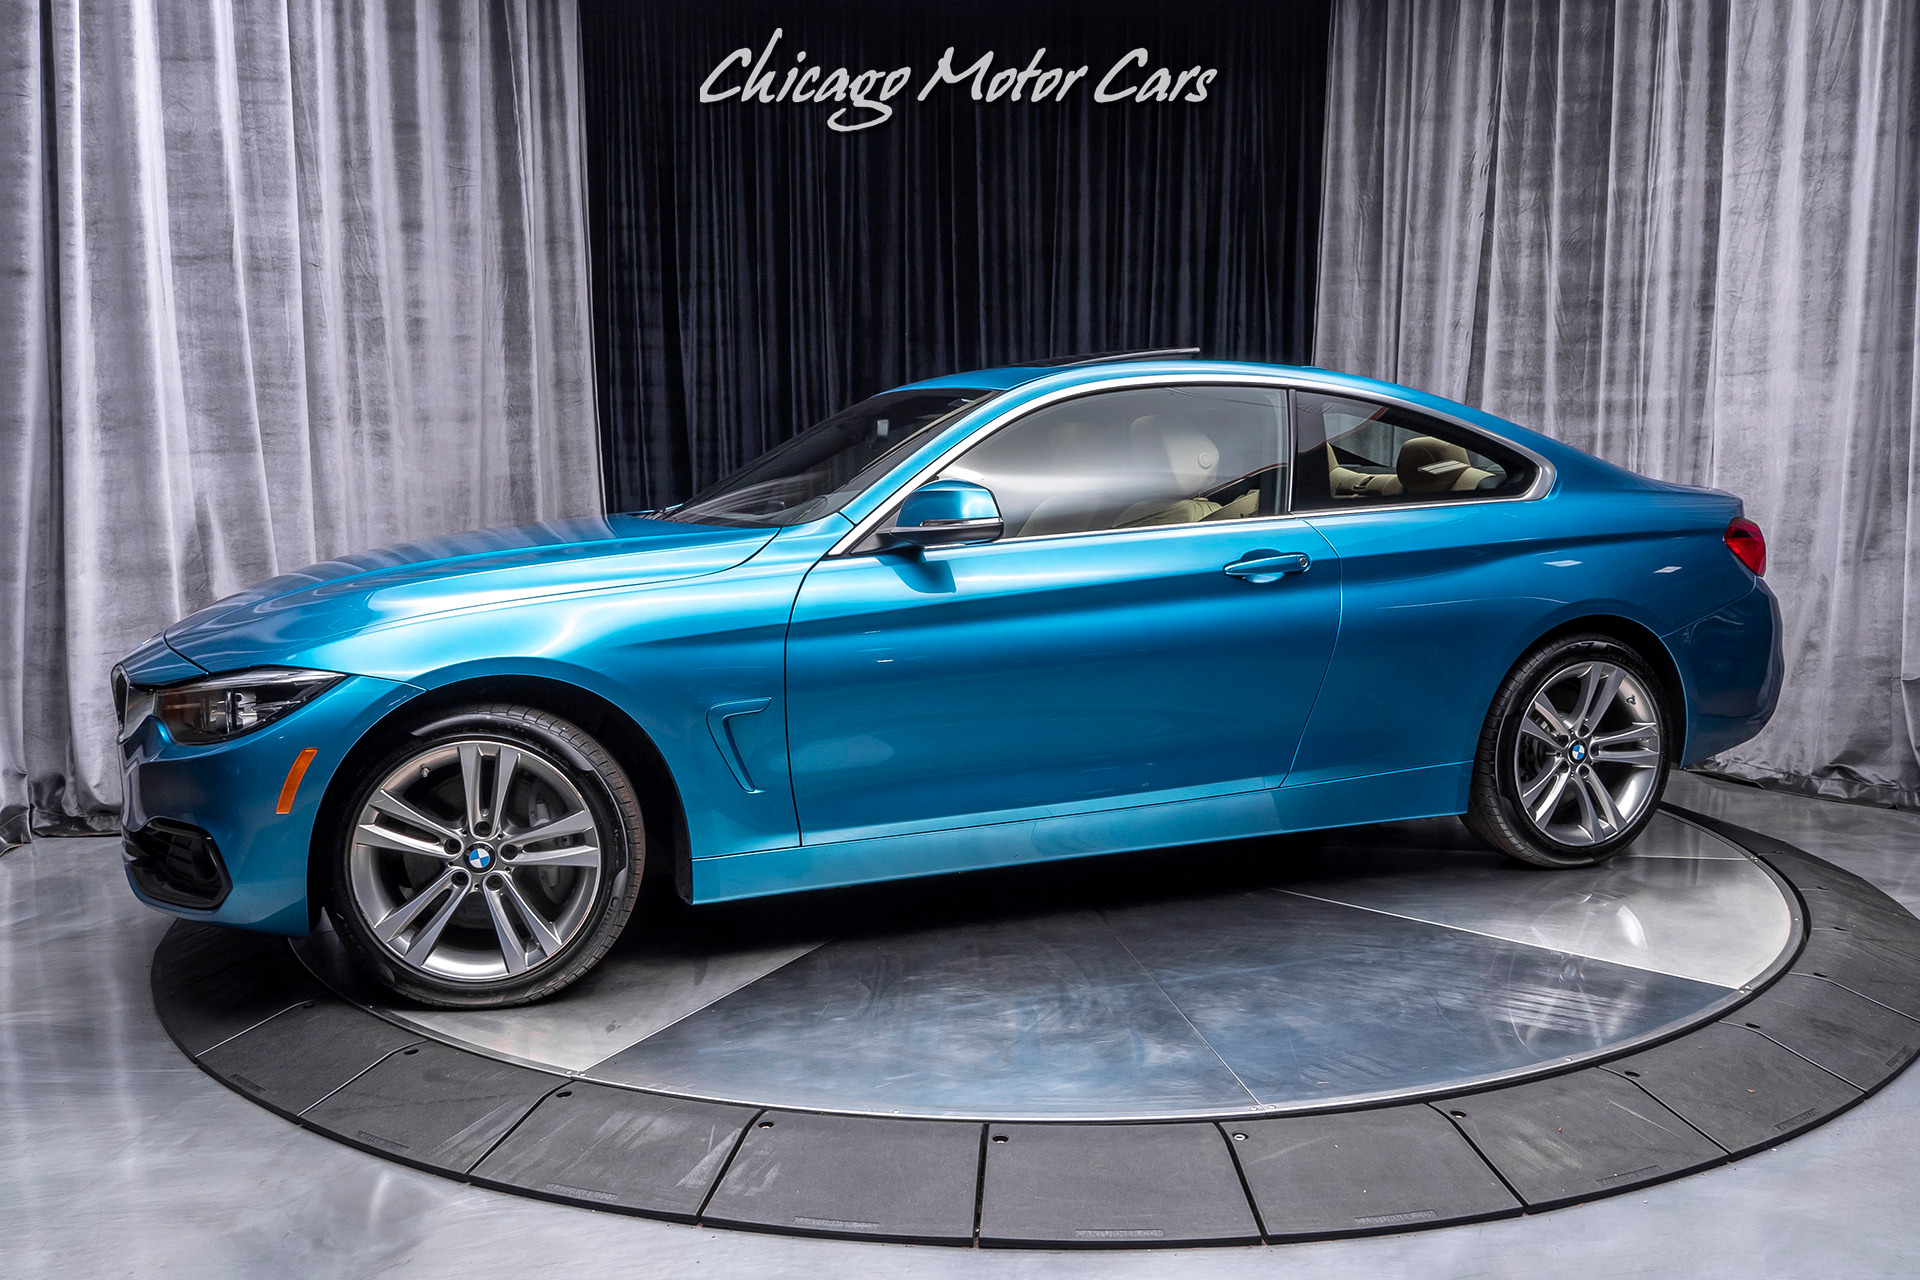 Used 2019 BMW 440i xDrive Coupe MSRP $56K+ For Sale (Special Pricing) |  Chicago Motor Cars Stock #16099